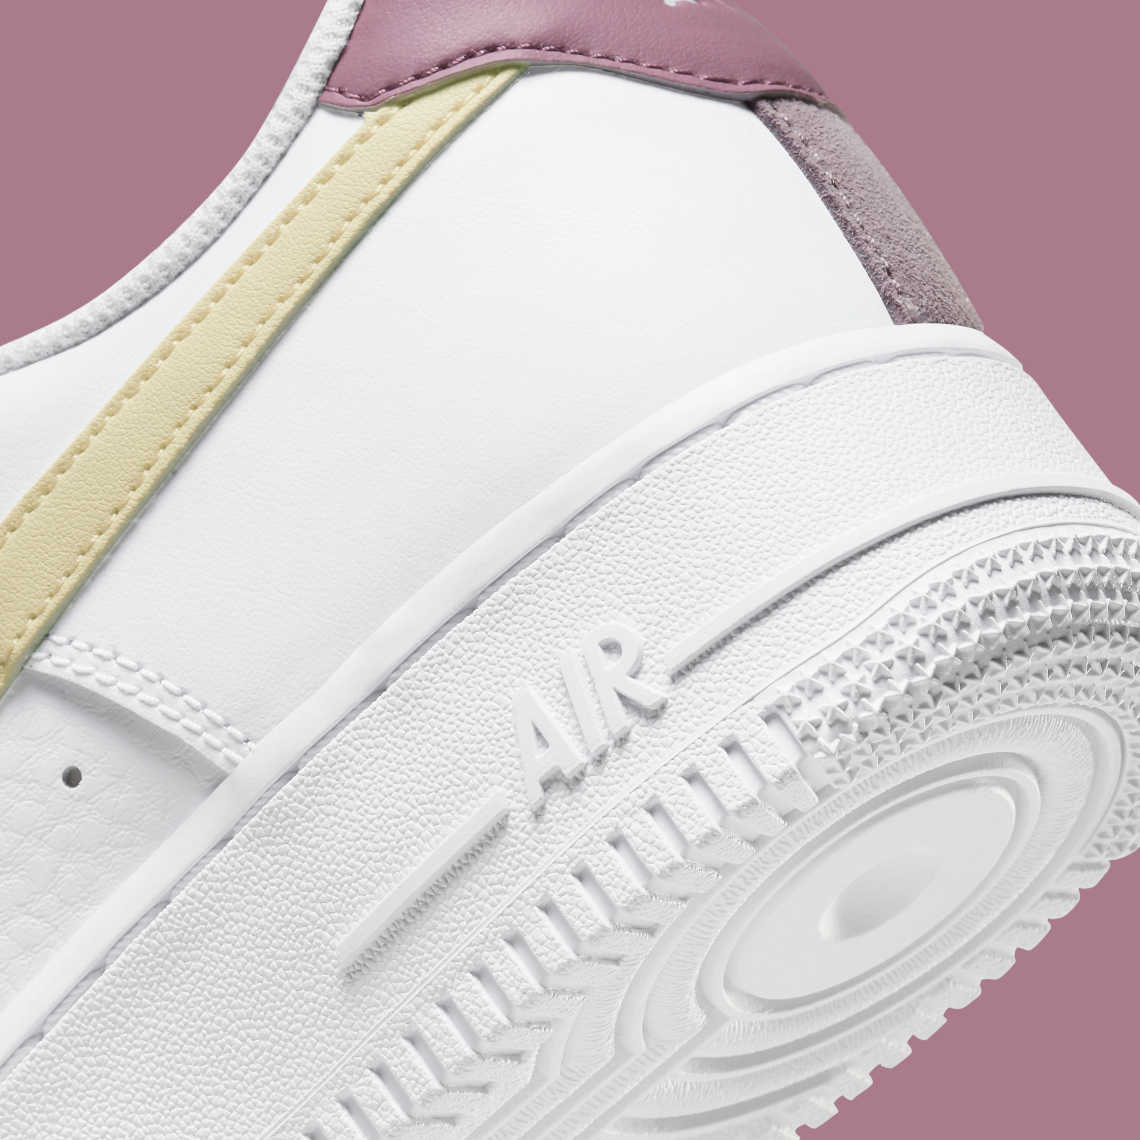 Nike Air Force 1 Low White Pink DN4930-100 | SneakerNews.com